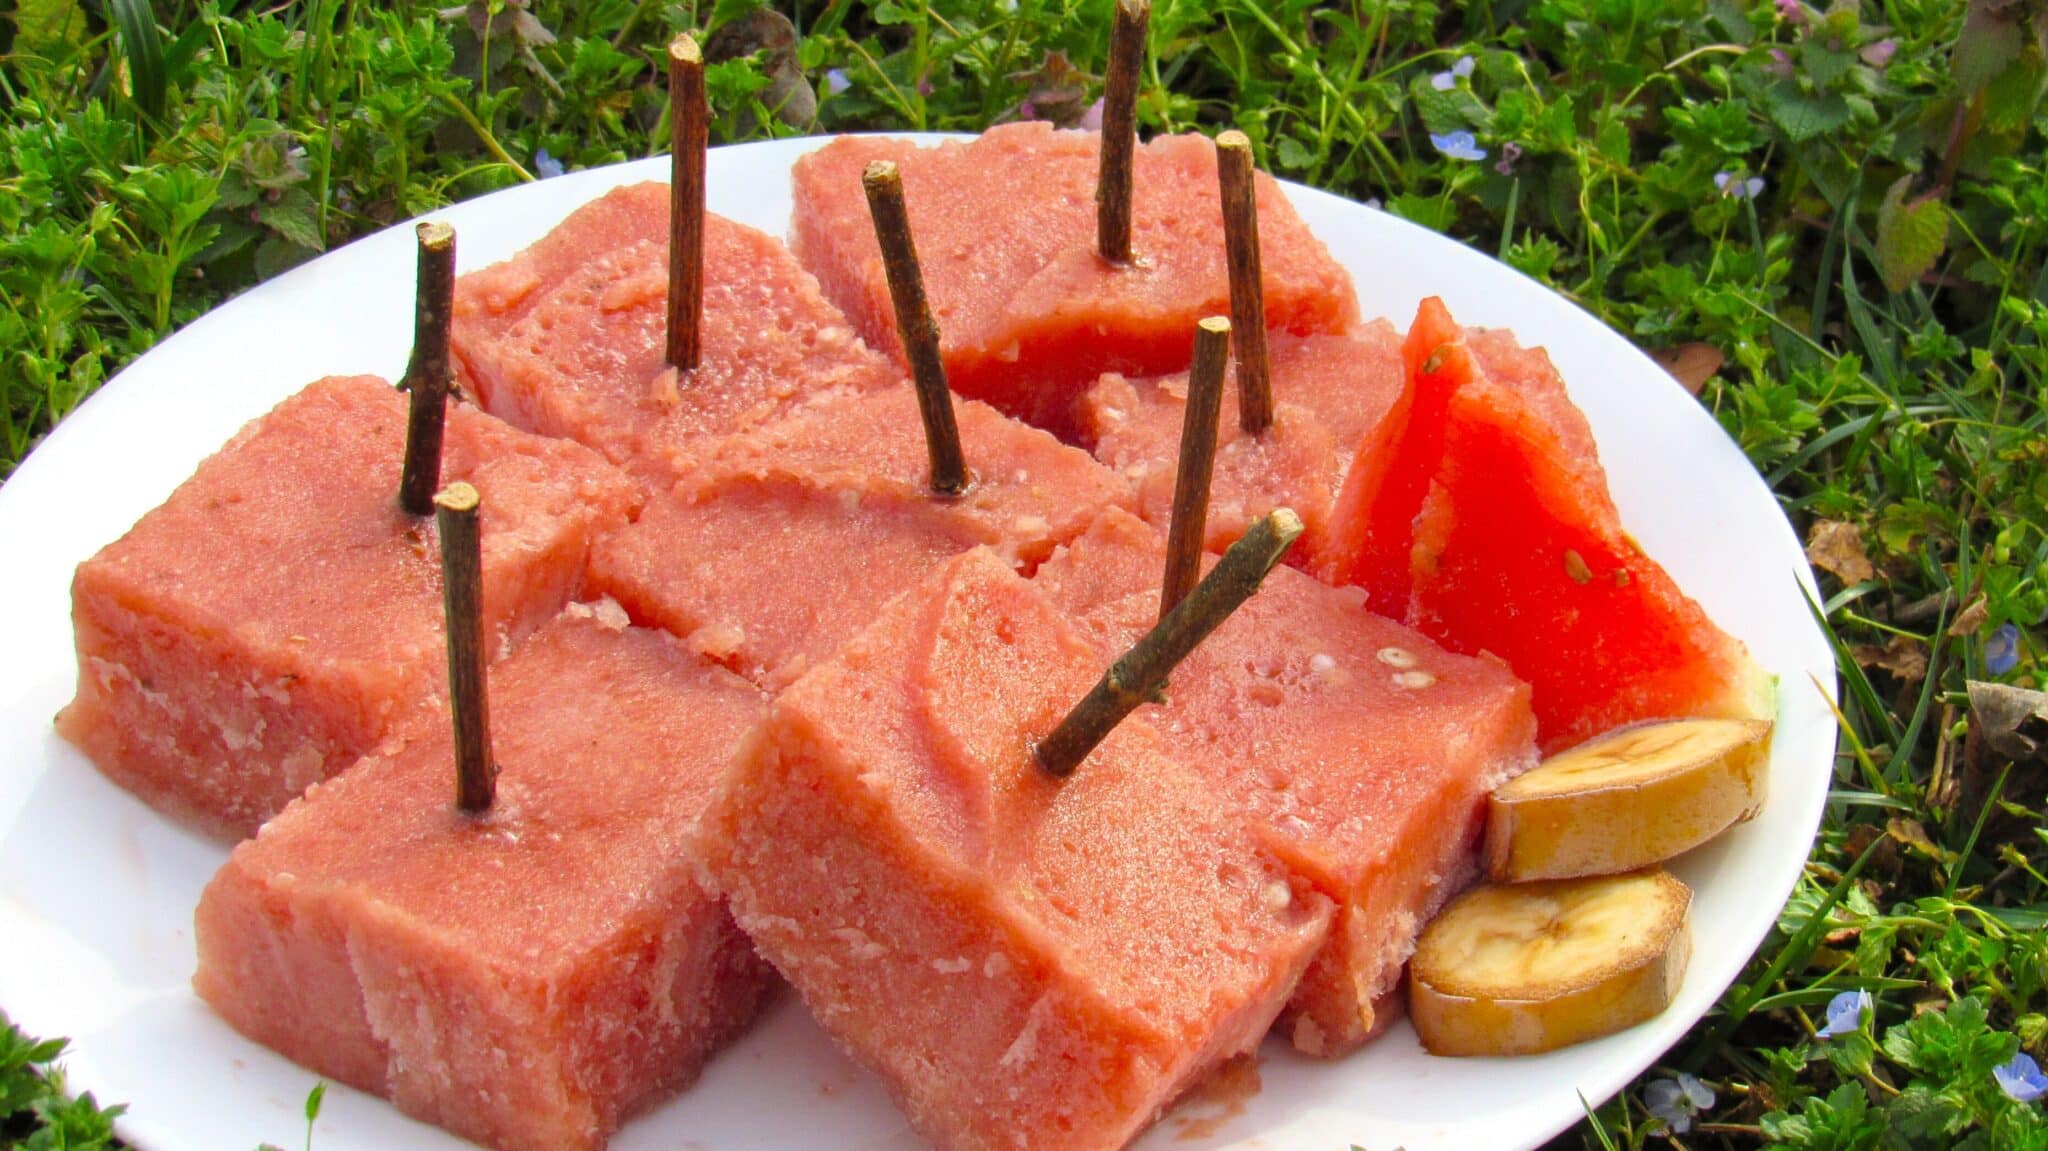 Watermelon banana popsicles are served on a white plate outside.